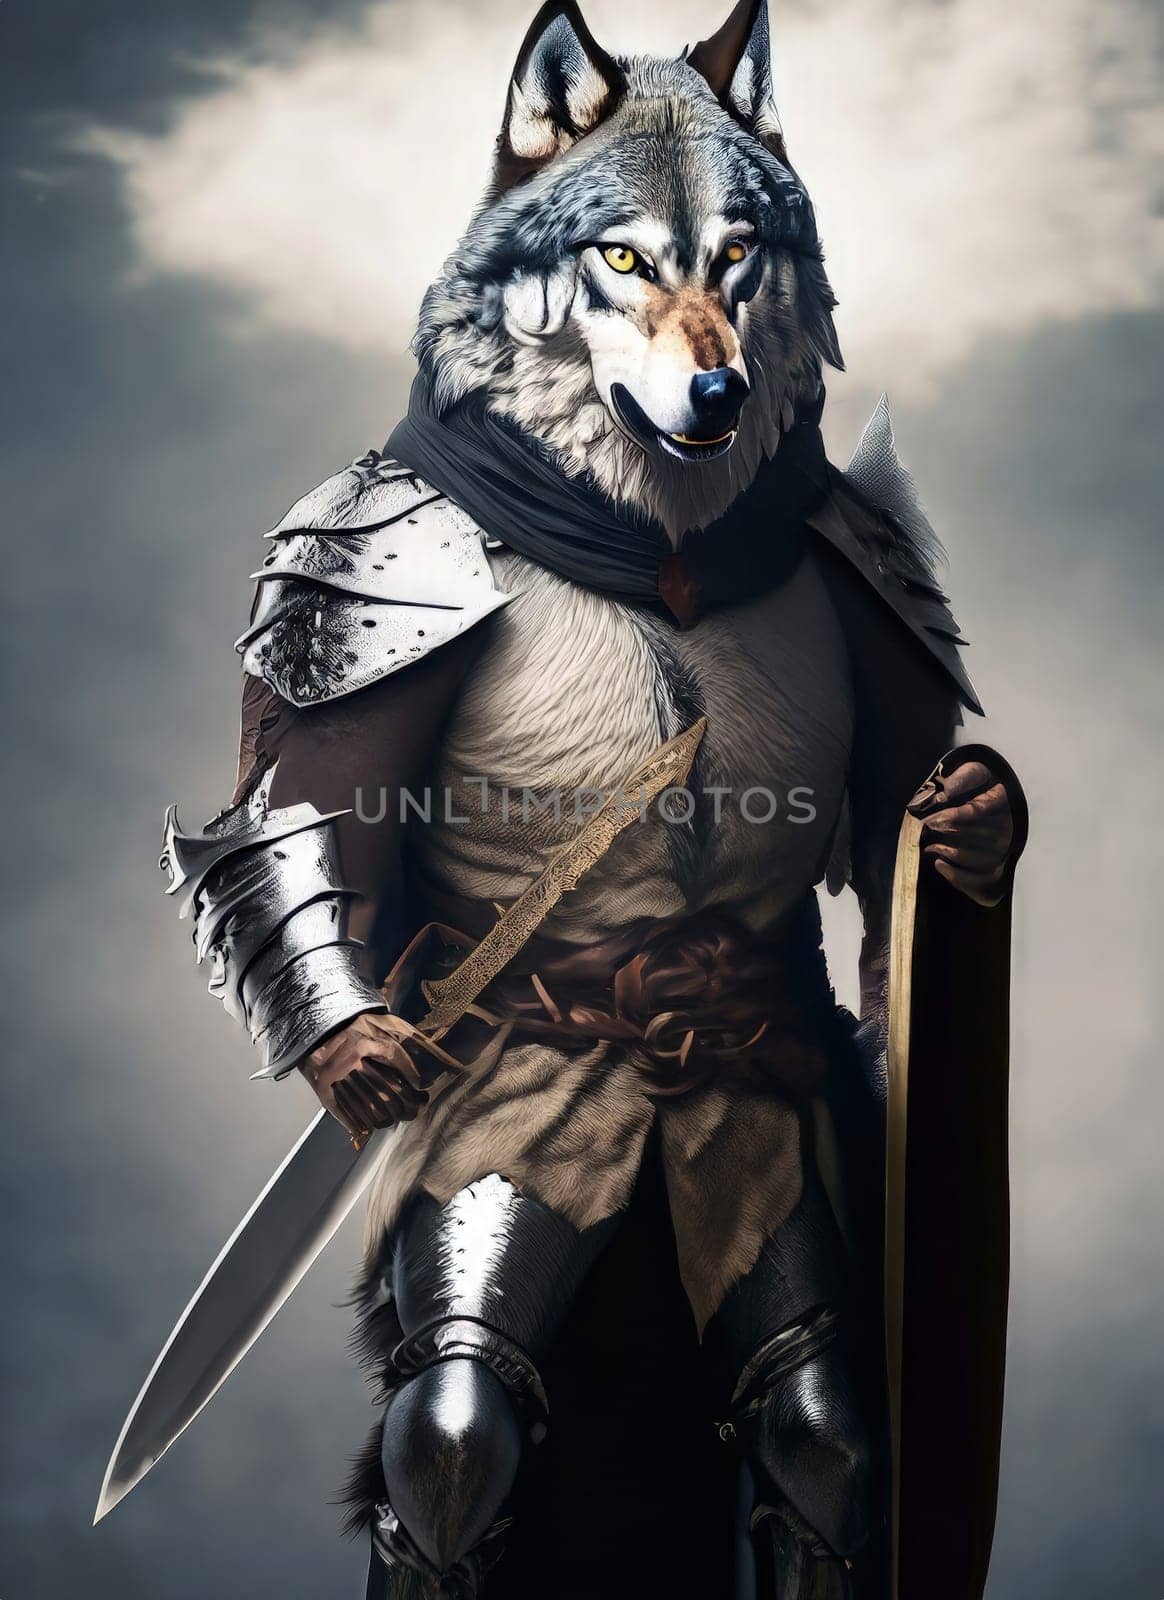 Portrait of a wolf warrior in armor with a sword and shield by Waseem-Creations